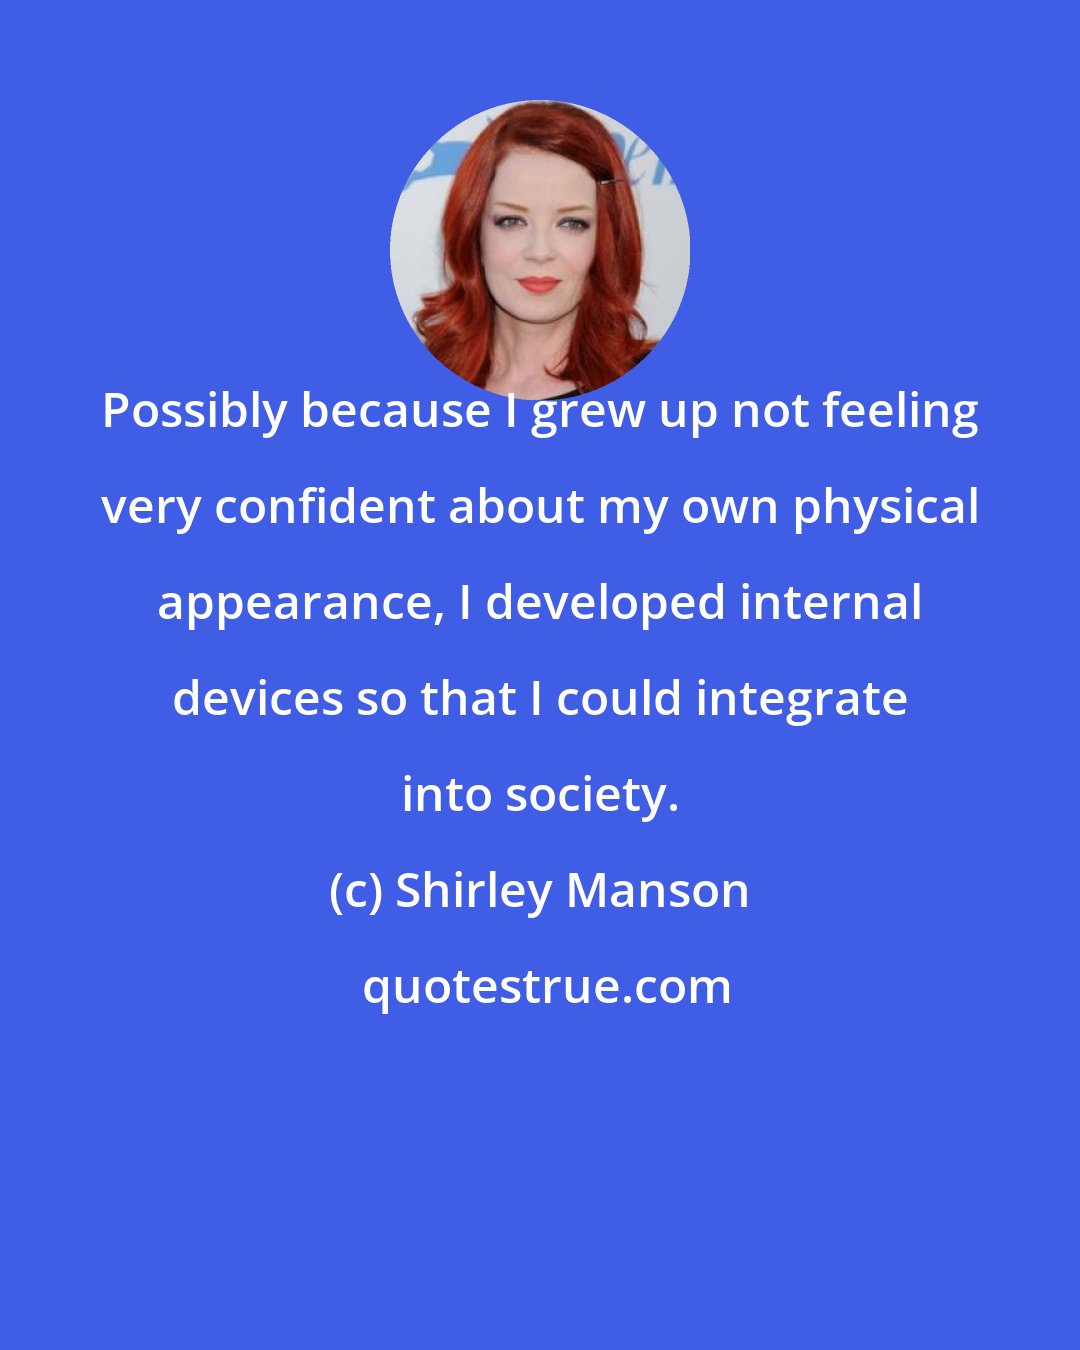 Shirley Manson: Possibly because I grew up not feeling very confident about my own physical appearance, I developed internal devices so that I could integrate into society.